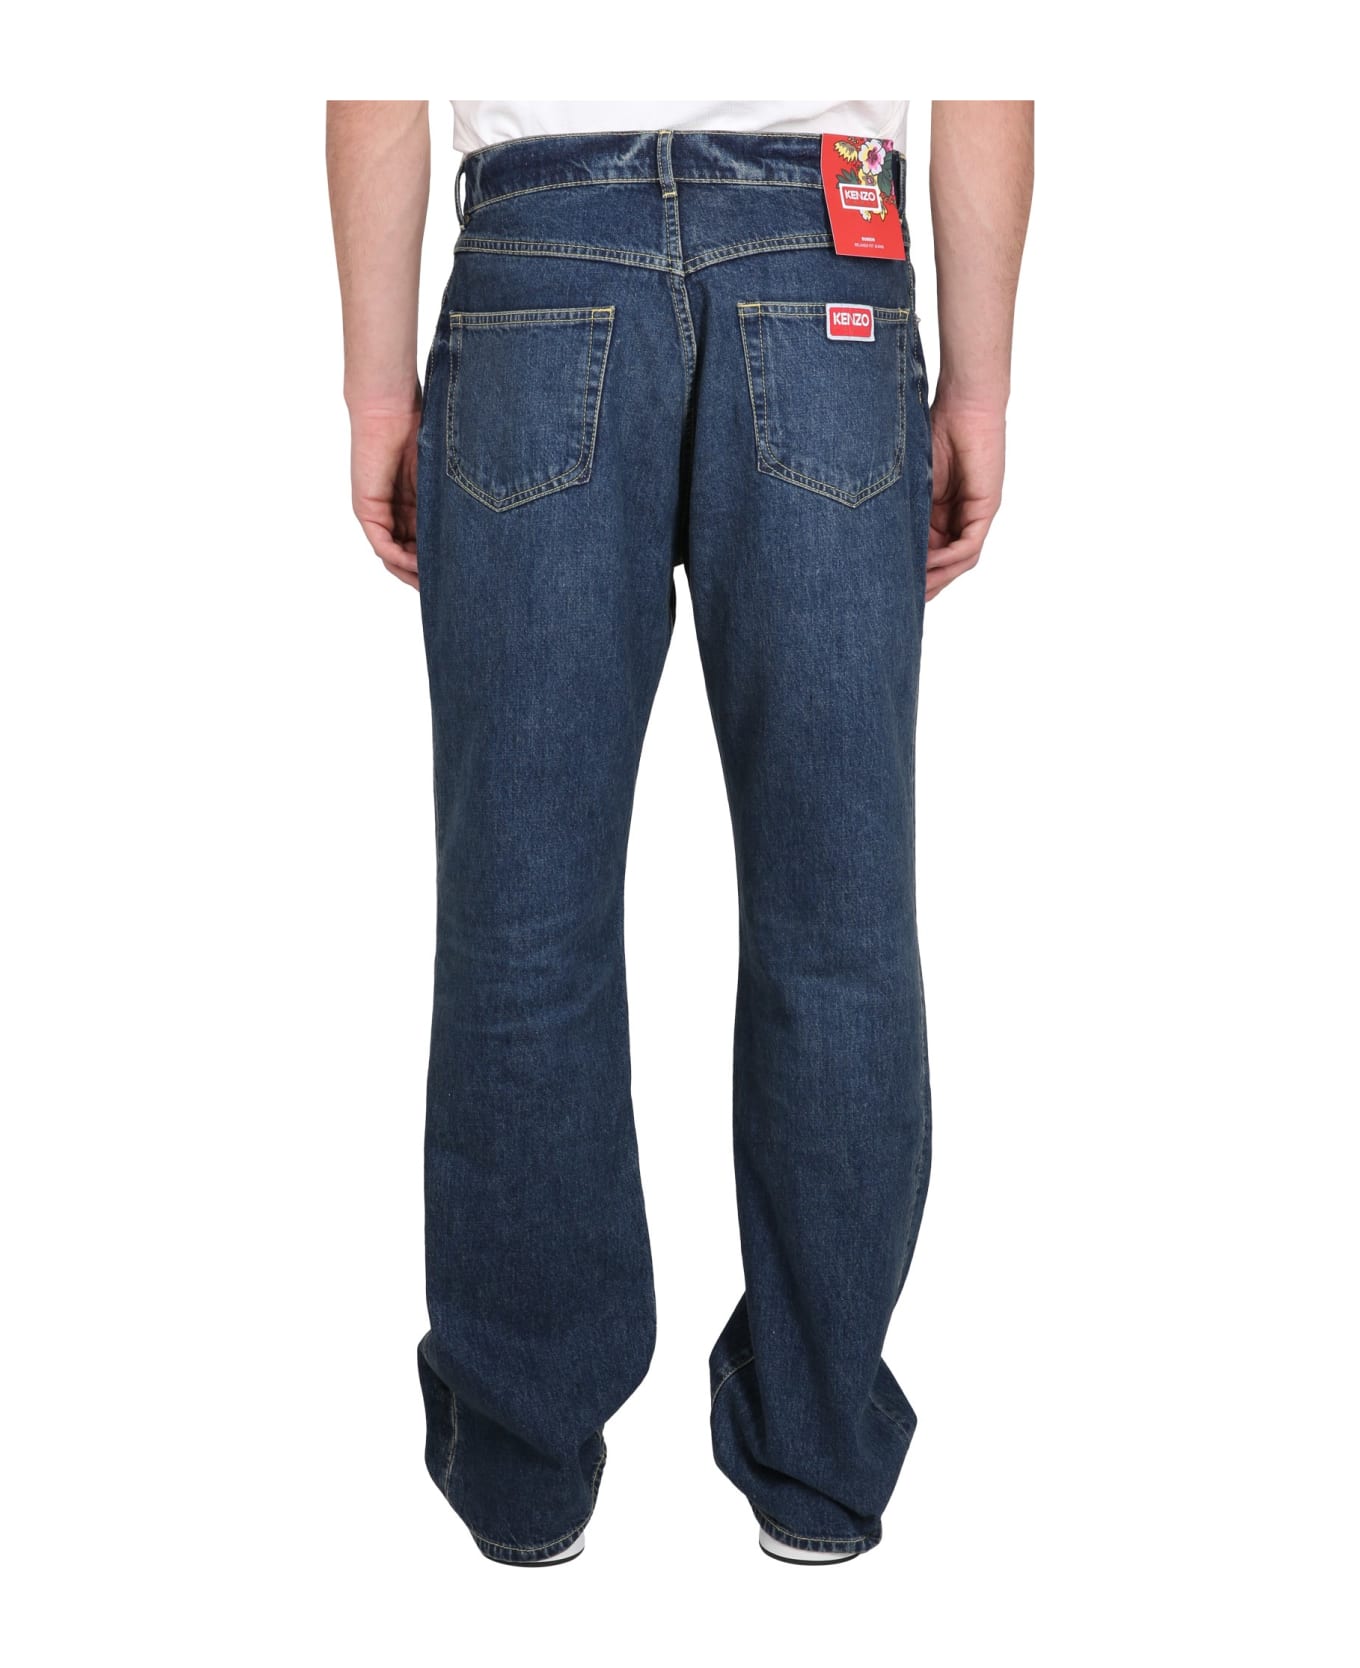 Kenzo Relaxed Fit Jeans - BLU